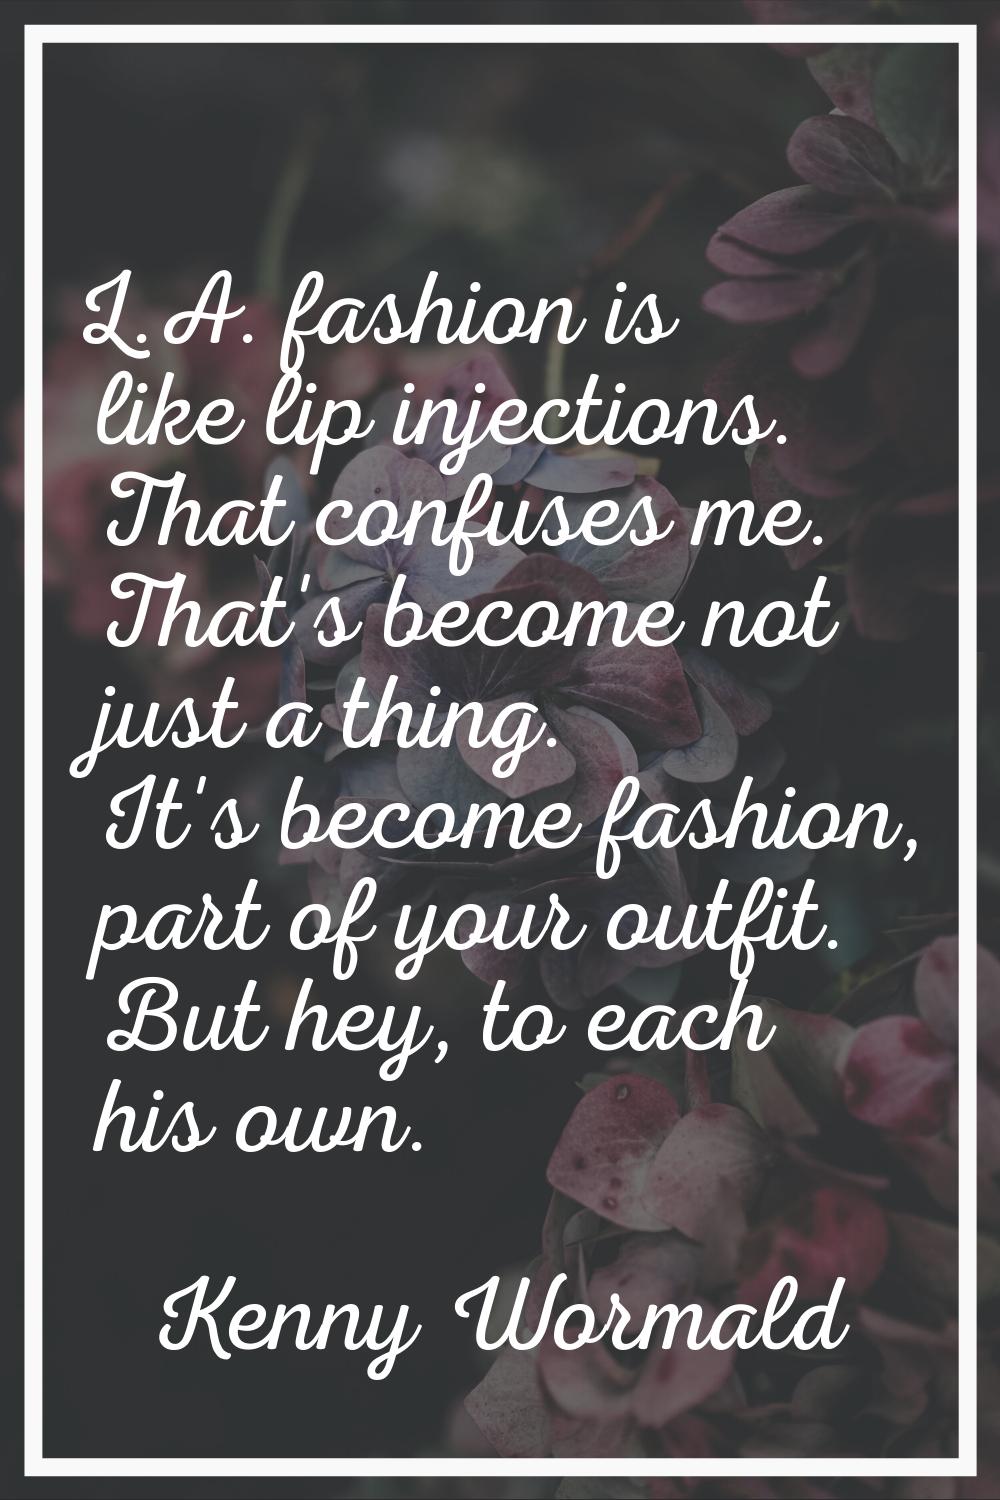 L.A. fashion is like lip injections. That confuses me. That's become not just a thing. It's become 